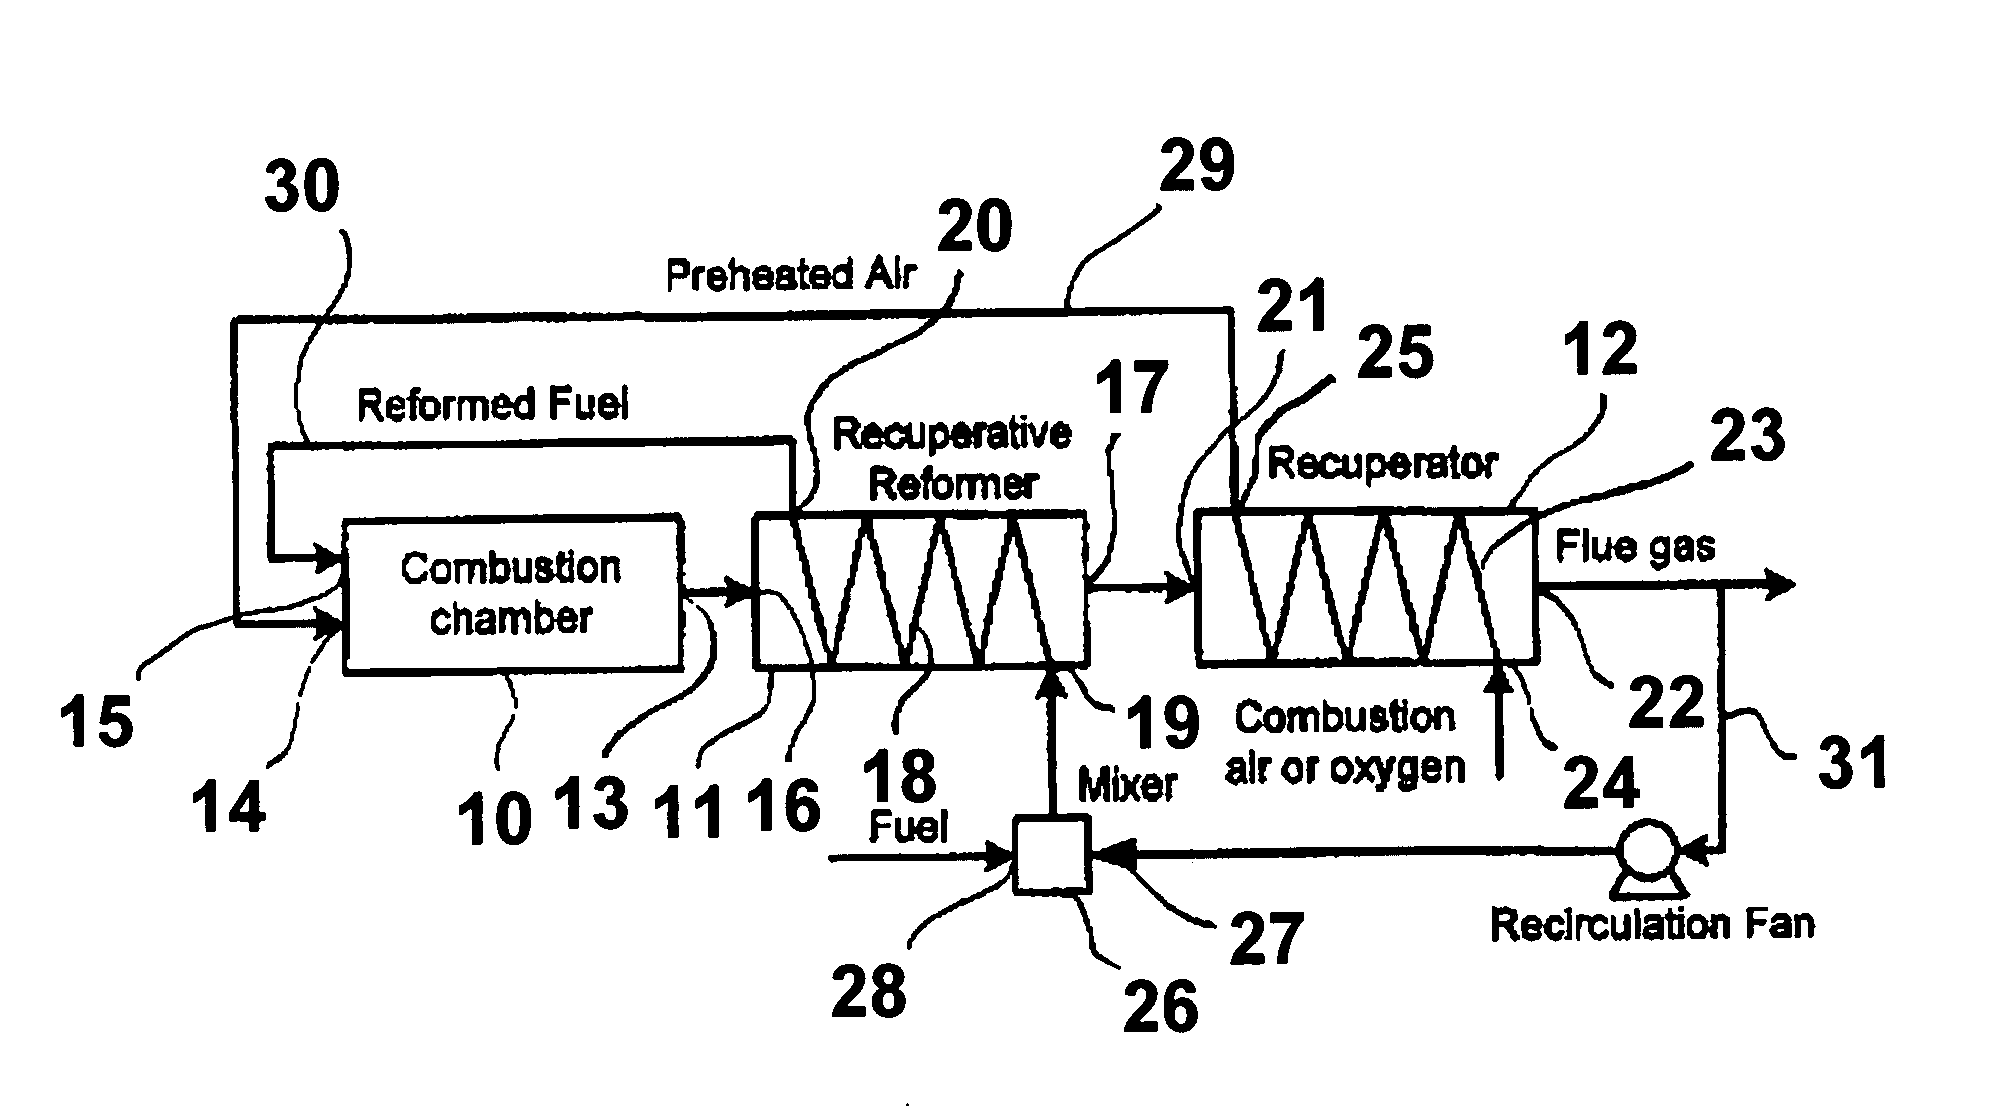 Method and apparatus for thermochemical recuperation with partial heat recovery of the sensible heat present in products of combustion